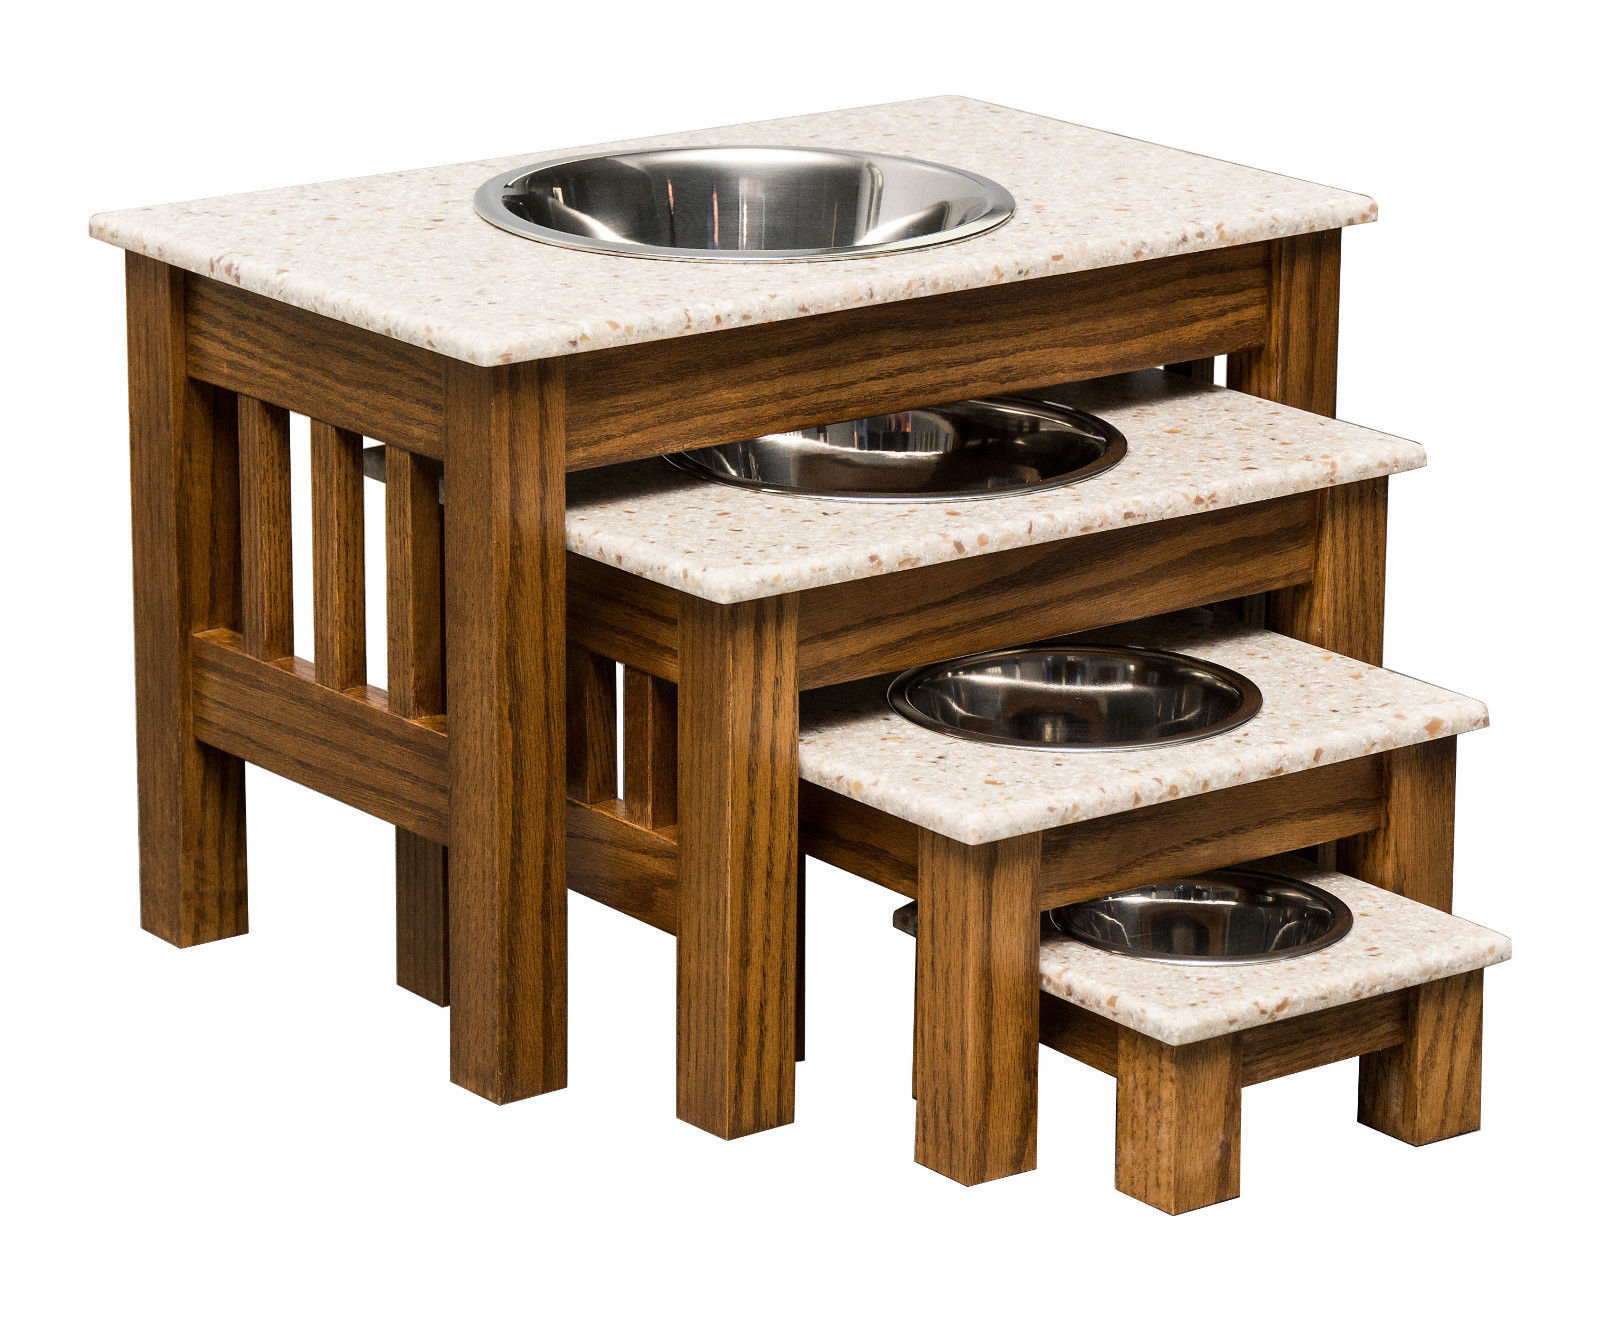 Primary image for LUXURY WOOD DOG FEEDER with CORIAN TOP - Handmade Elevated Oak Stand with Bowls